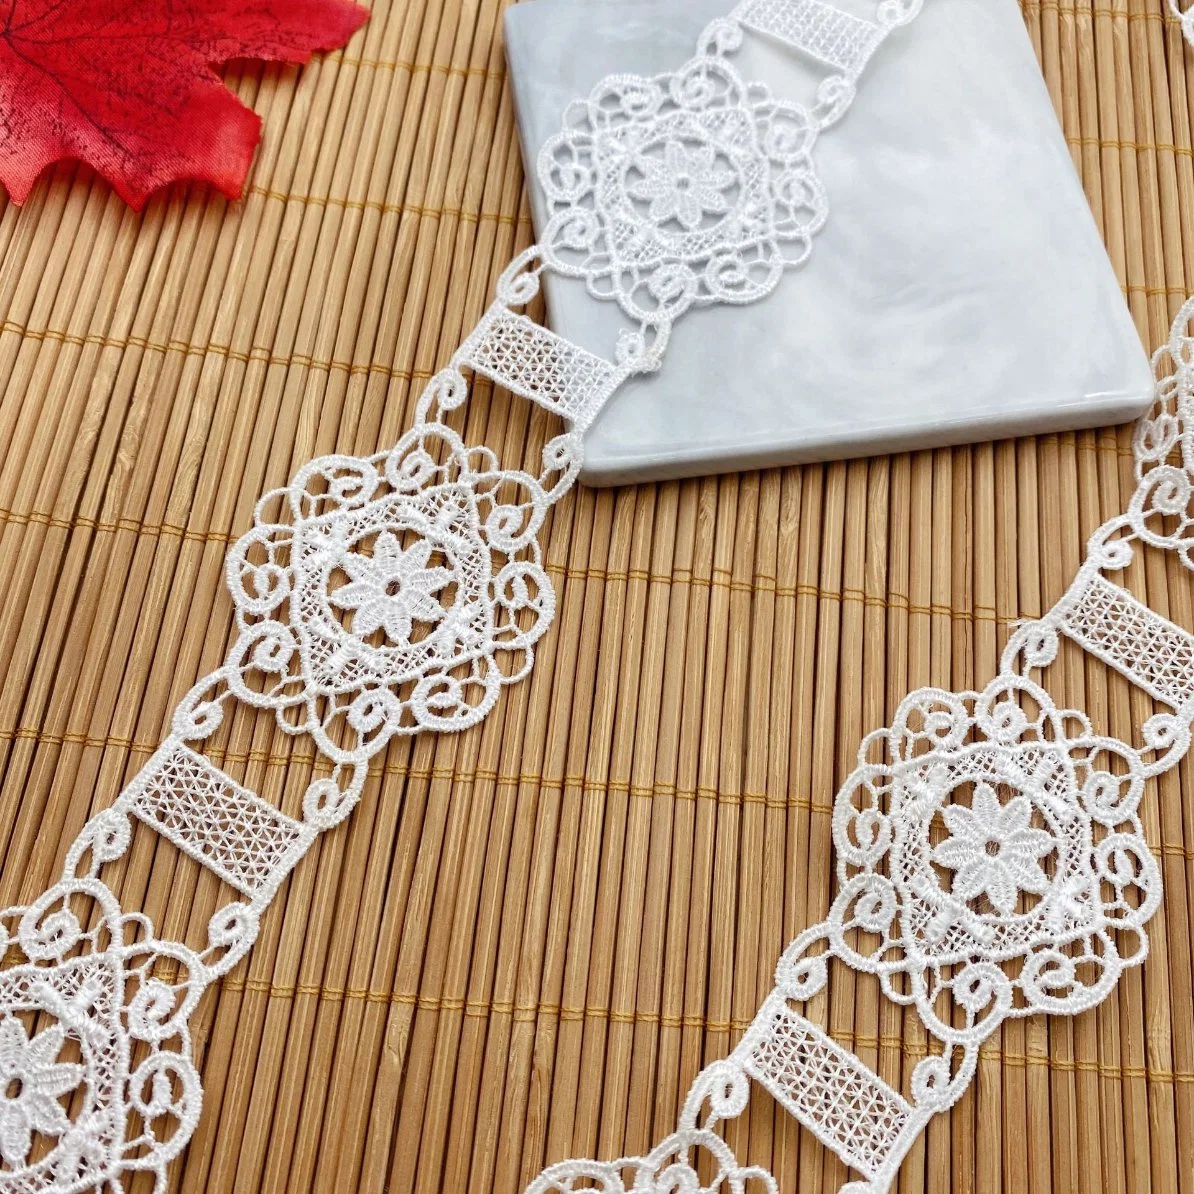 Stock Supply Polyester Light Embroidery Lace Water-Soluble Barcode Wedding Dress Accessories DIY Embroidery